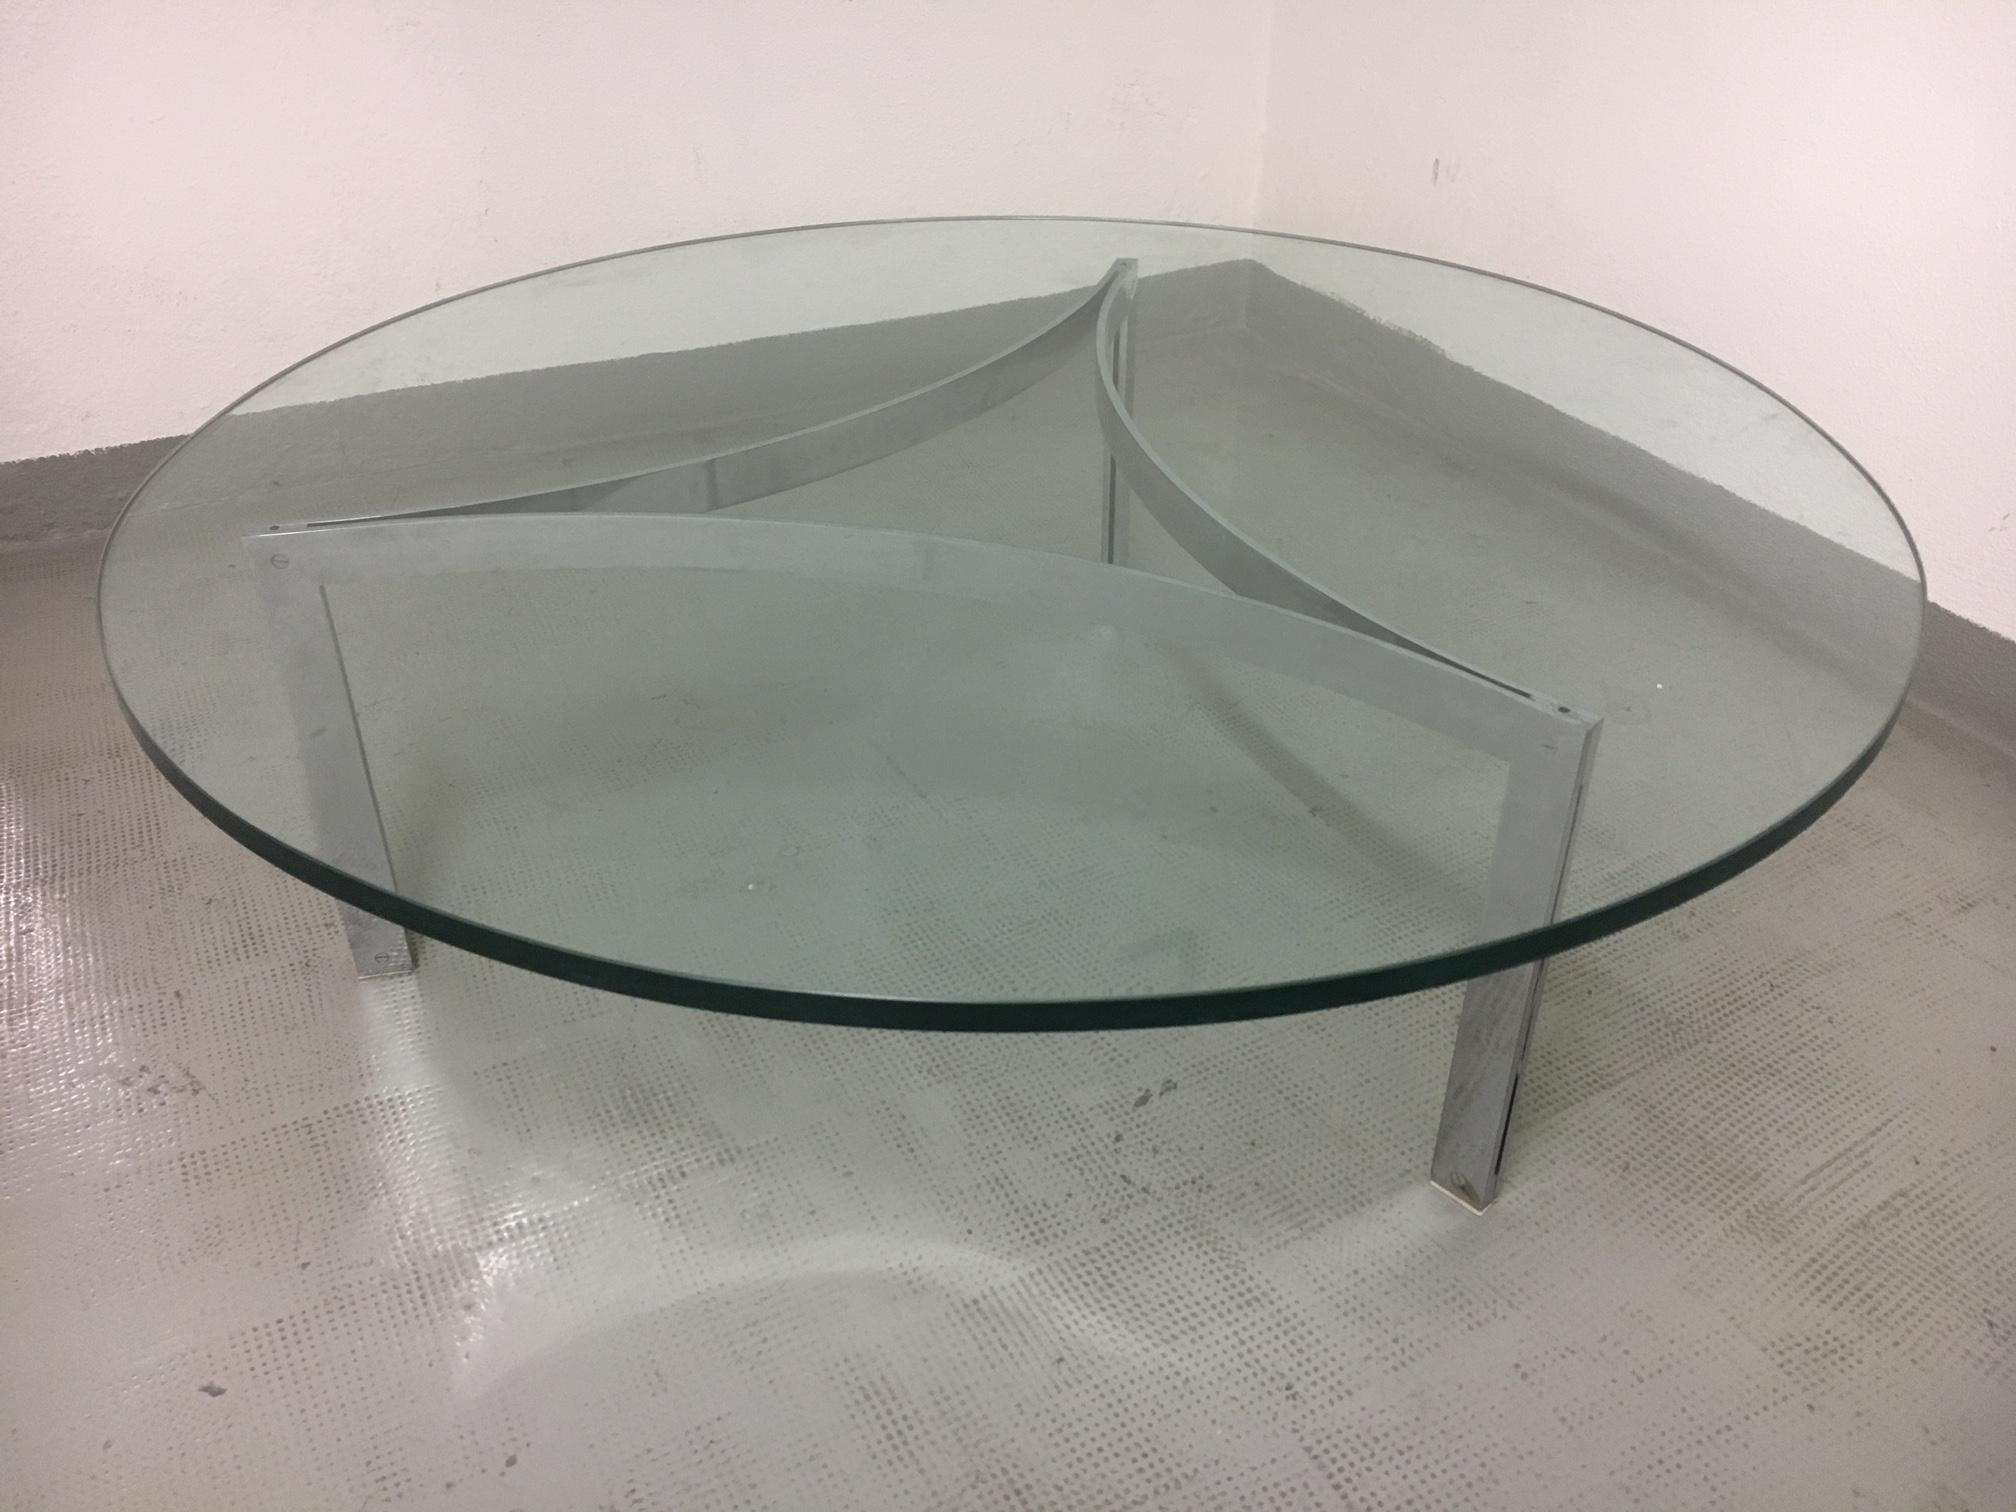 Chromed steel and thick glass coffee table attributed to Preben Fabricius and Jorgen Kastholm, Denmark circa 1960s.
Measures: 120 cm diameter, 40 cm high.